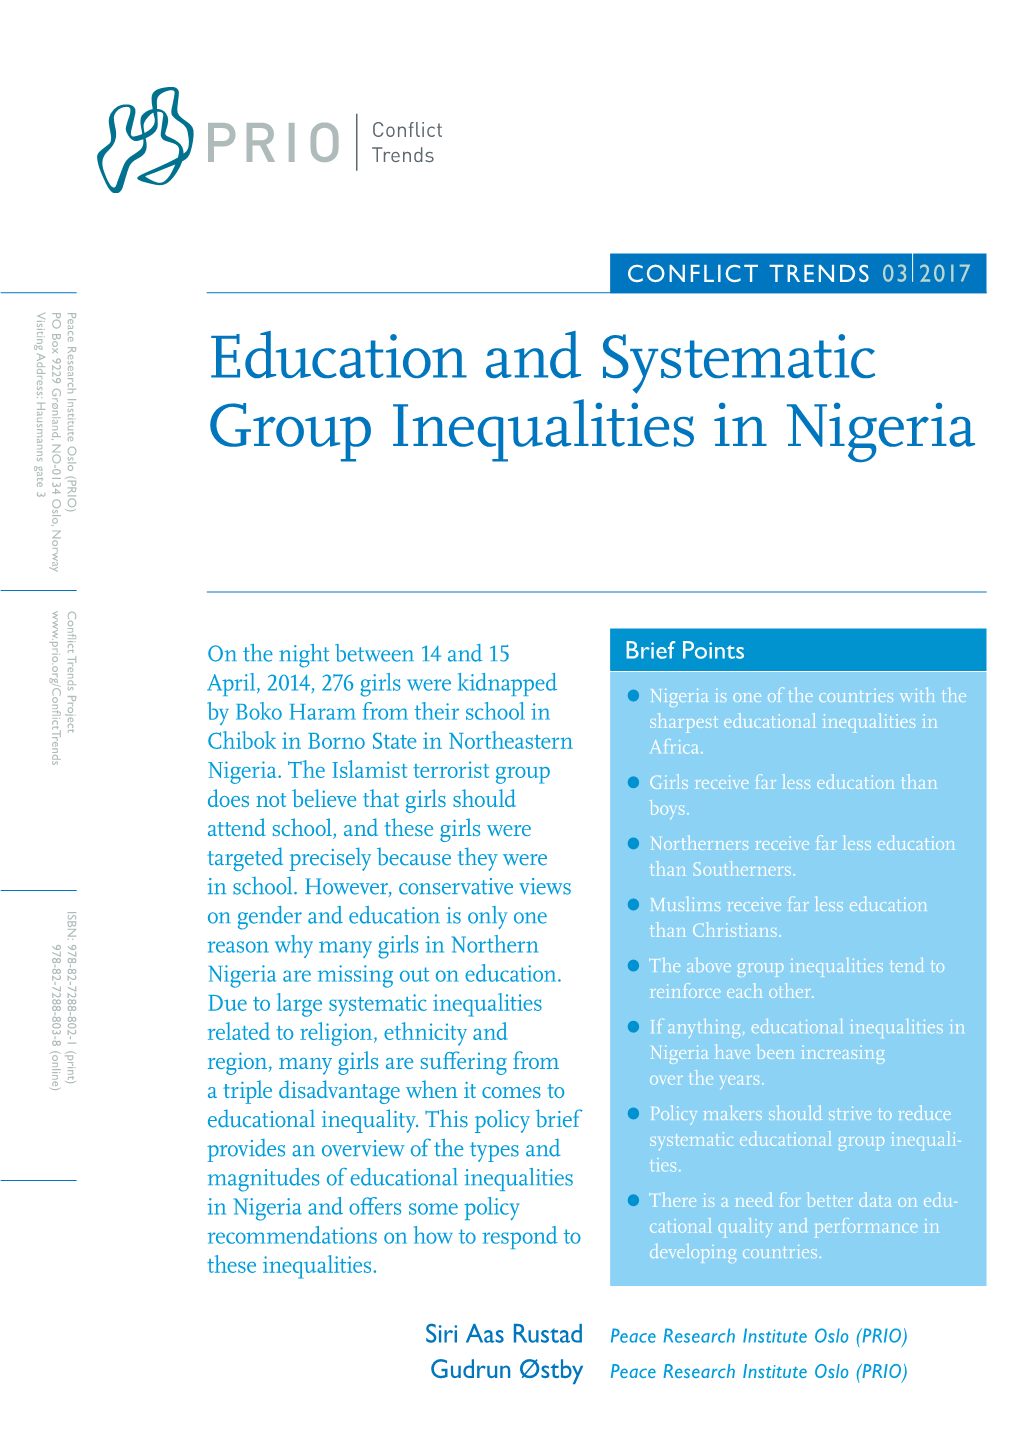 Education and Systematic Group Inequalities in Nigeria